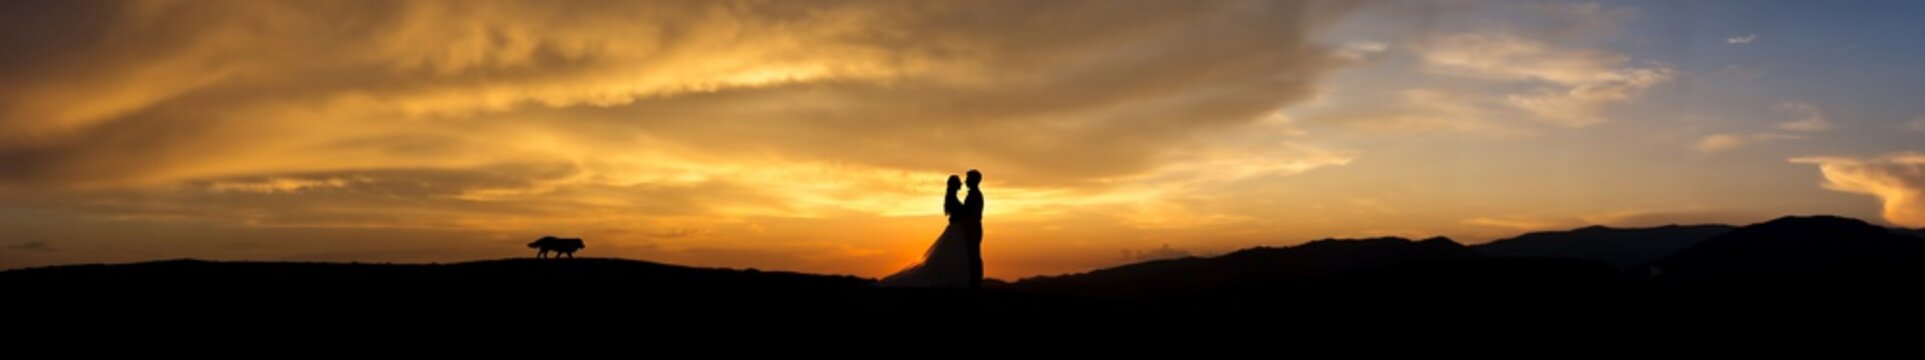 Silhouette of young married couple at sunset.Valentine's day concept.